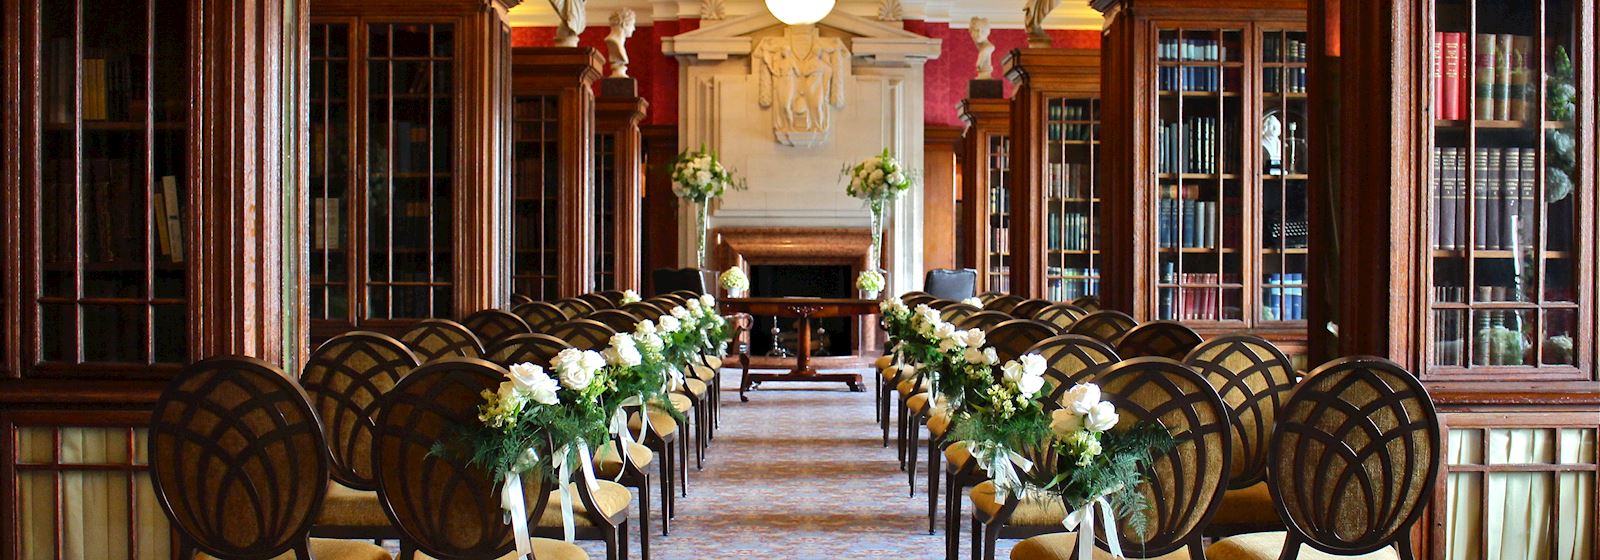 wedding party venues london county hall